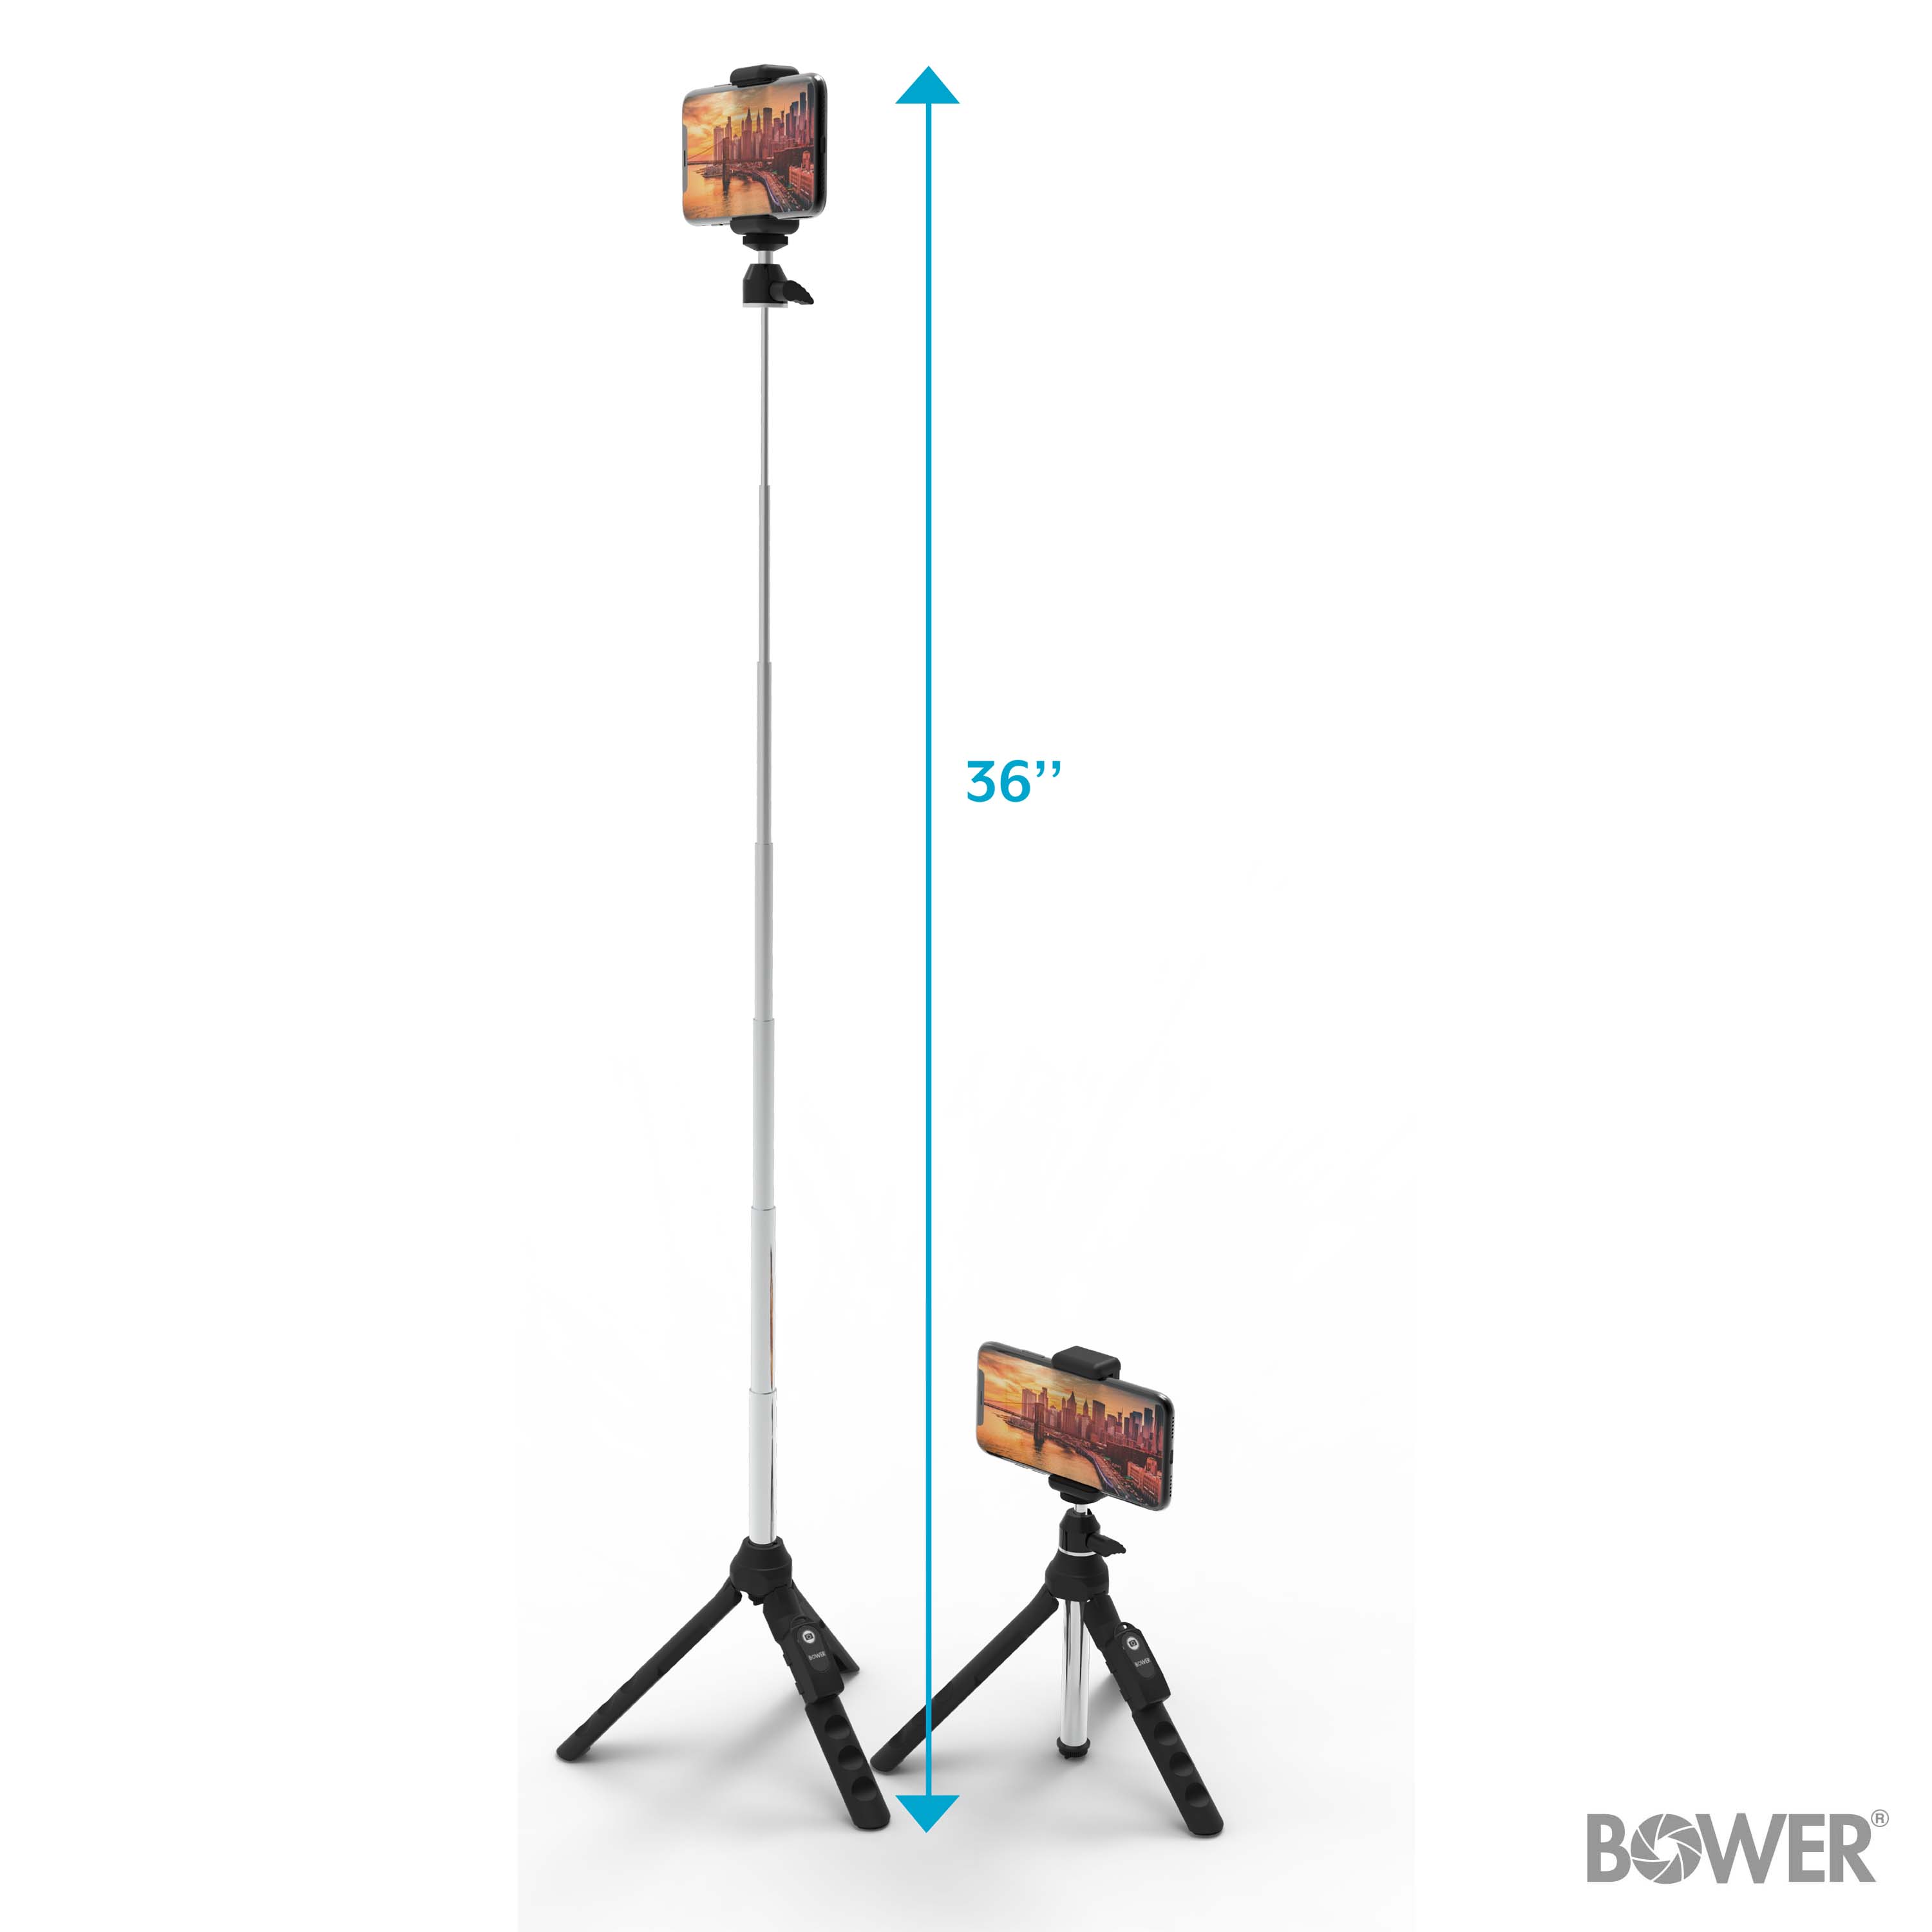 Bower 6 -in-1 Multi Selfie Tripod with Smartphone, GoPro Mount, and Rechargeable Wireless Remote, Black - image 5 of 7